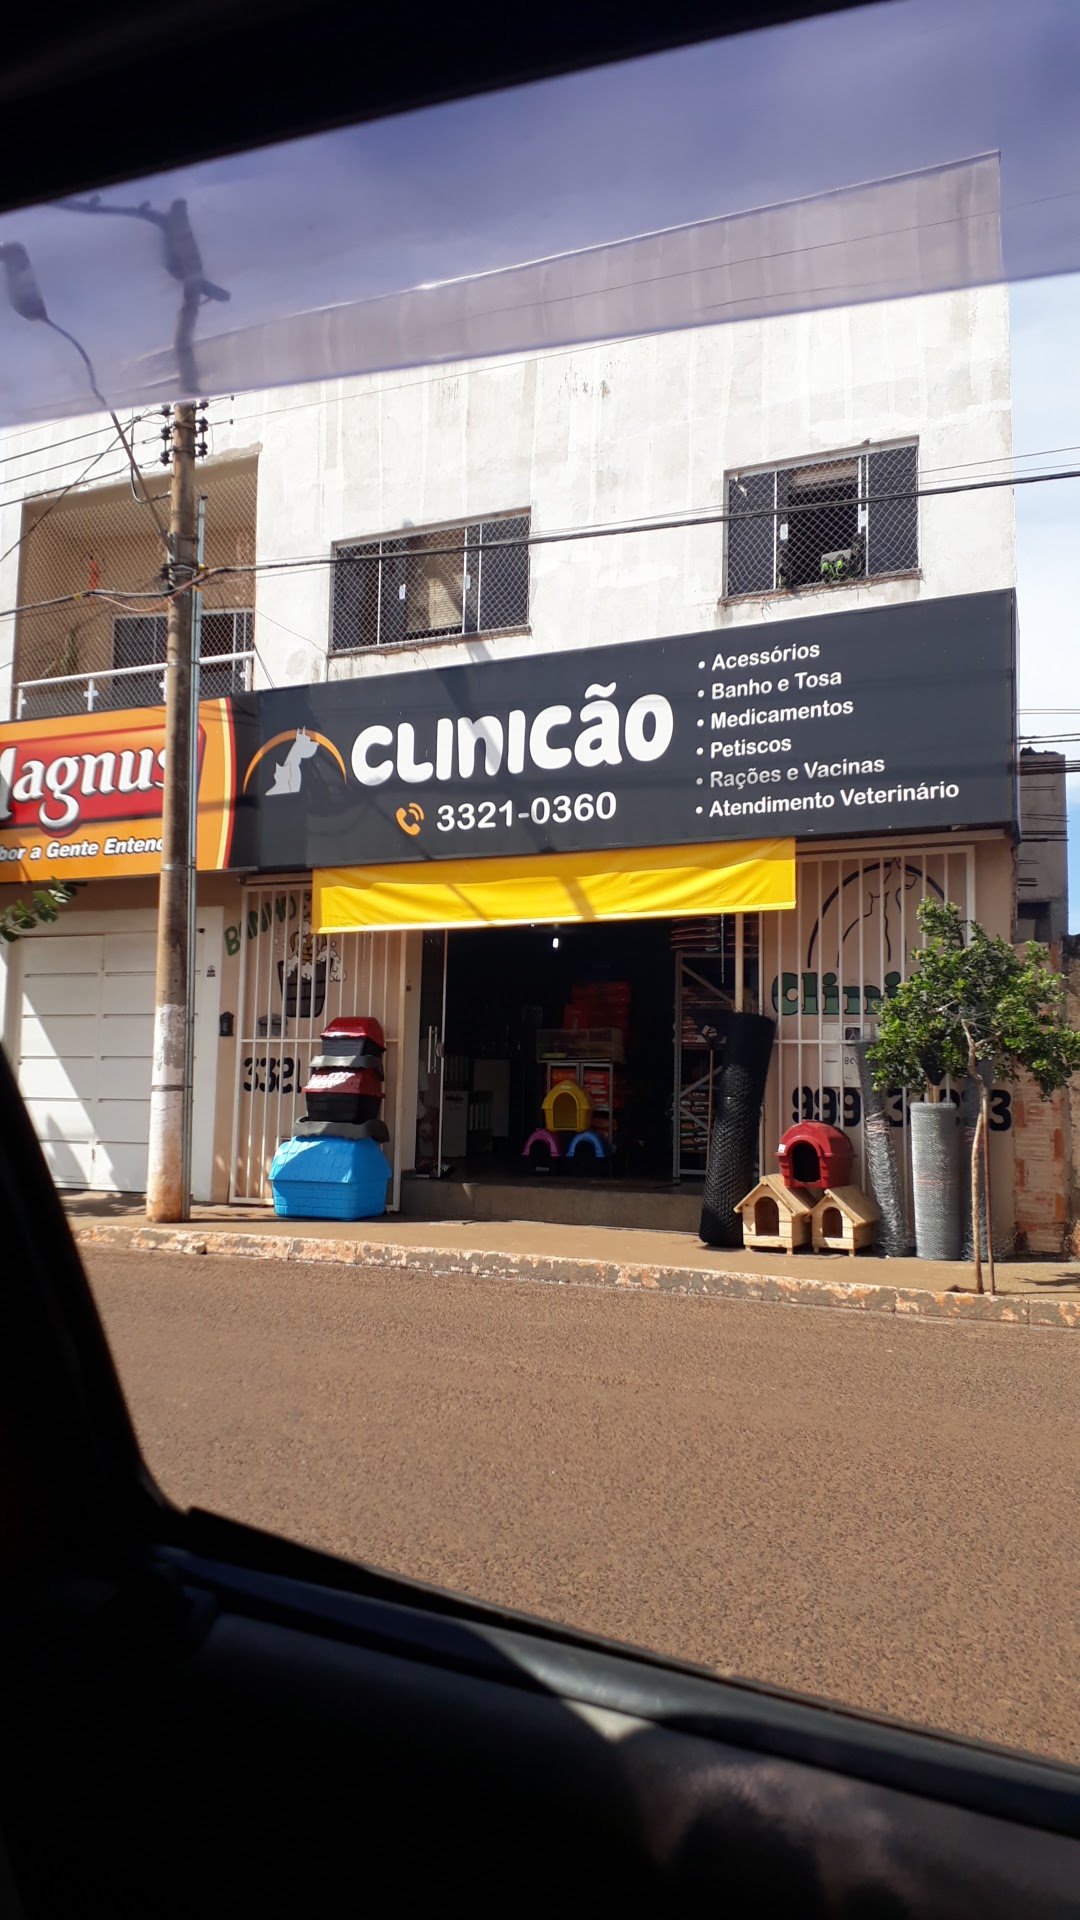 Clinicao